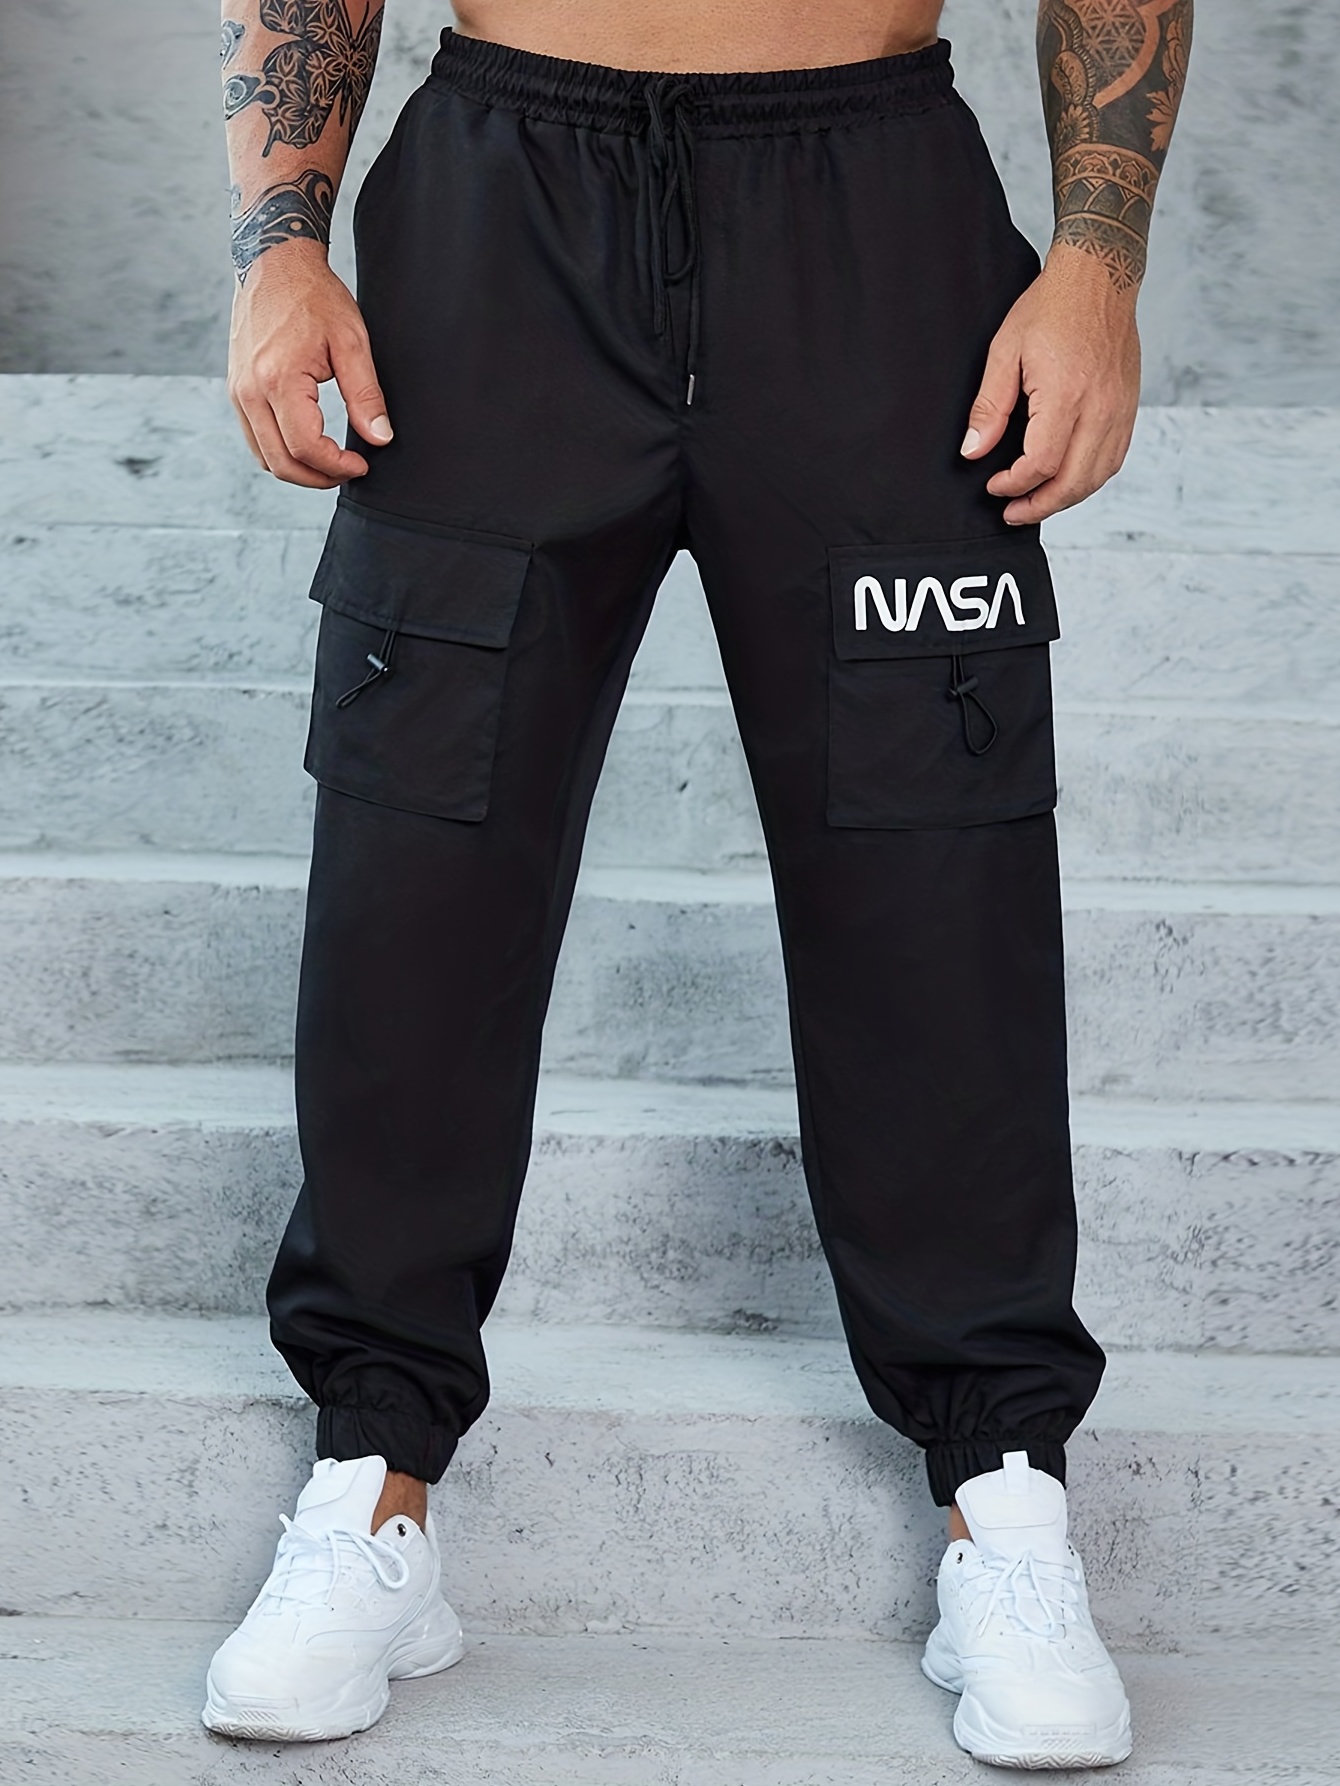 Plus Size Men's Casual Solid Cargo Pants With Pocket For Outdoor/workout,  Trendy Oversized Loose Fit Work Pants For Big & Tall Males, Men's Clothing